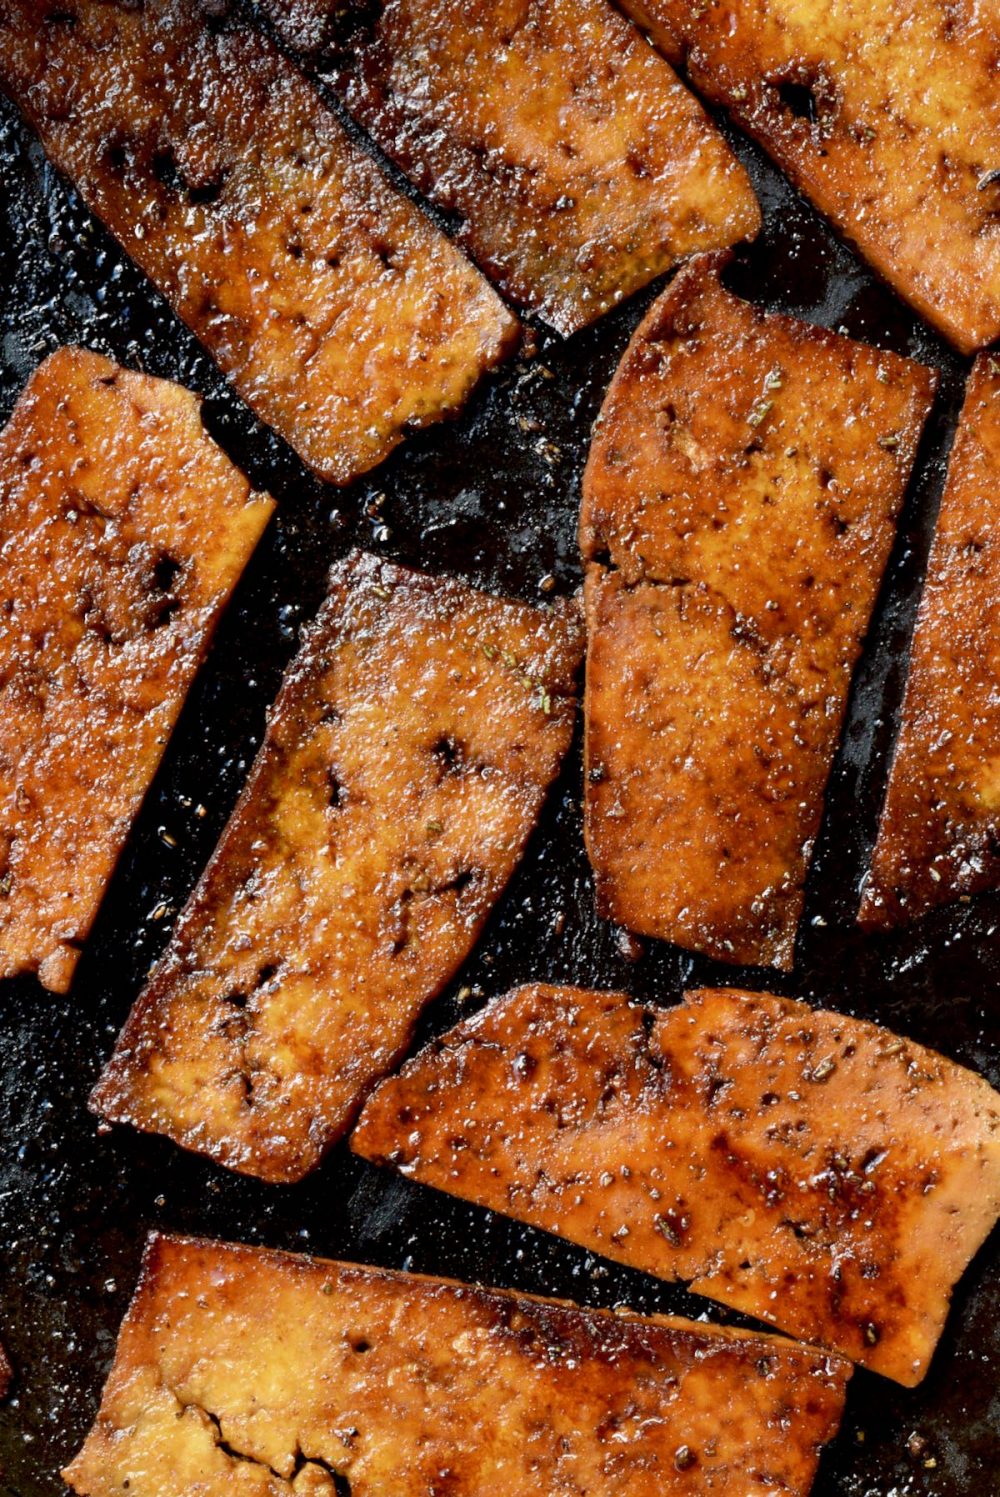 A top-down close-up of several deep brown fried slices of marinated tofu in a frying pan.